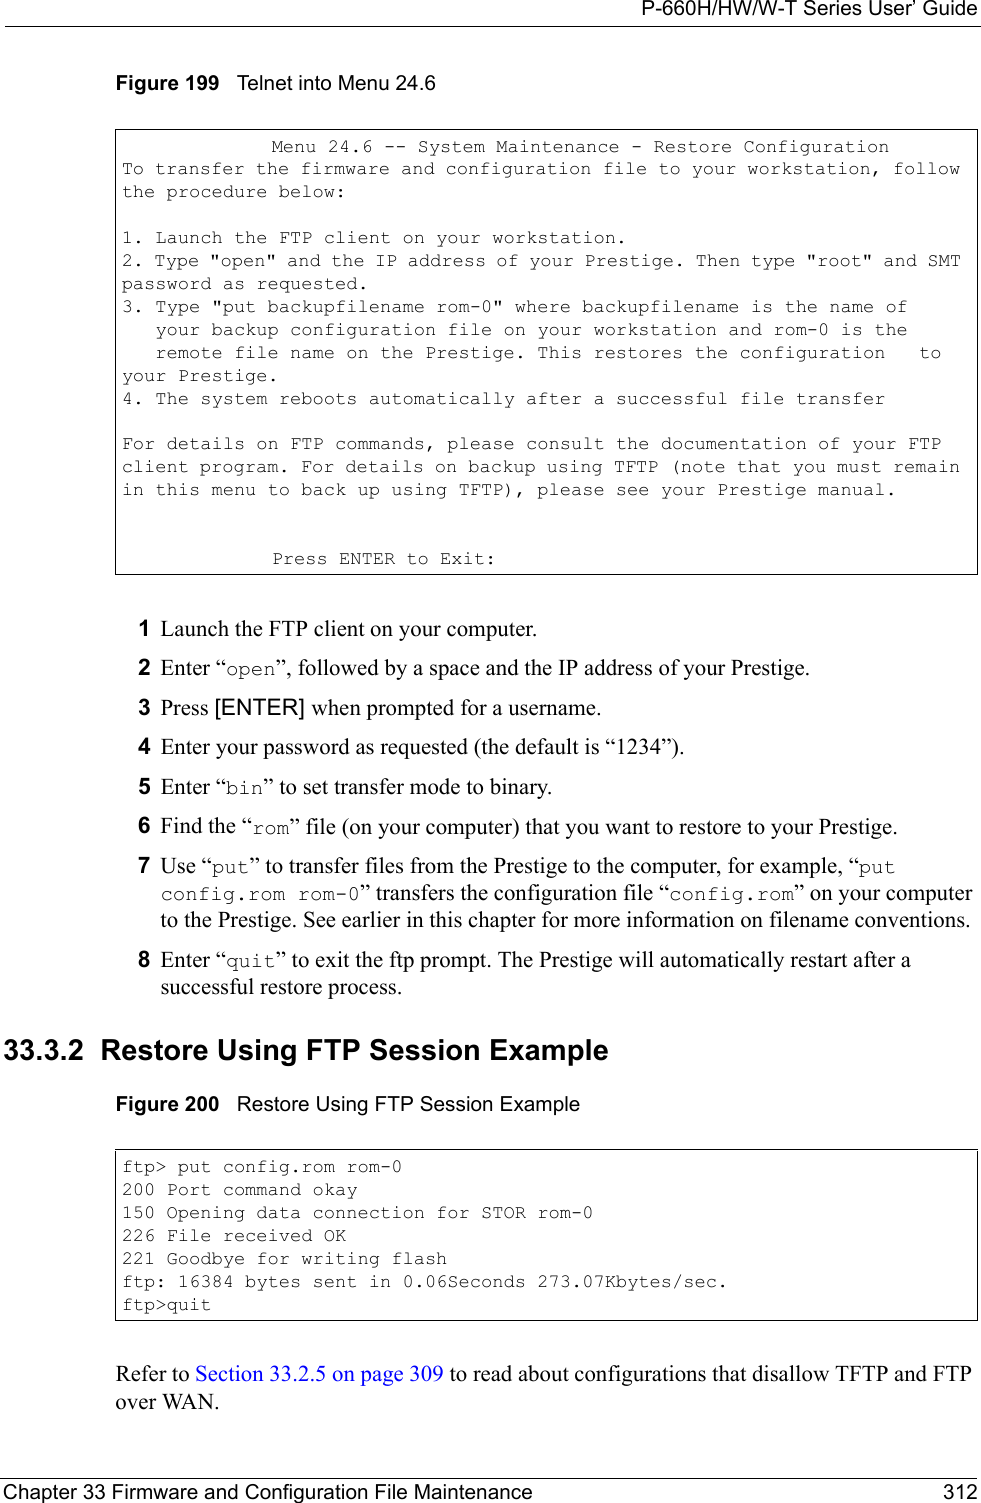 P-660H/HW/W-T Series User’ GuideChapter 33 Firmware and Configuration File Maintenance 312Figure 199   Telnet into Menu 24.61Launch the FTP client on your computer.2Enter “open”, followed by a space and the IP address of your Prestige. 3Press [ENTER] when prompted for a username.4Enter your password as requested (the default is “1234”).5Enter “bin” to set transfer mode to binary.6Find the “rom” file (on your computer) that you want to restore to your Prestige.7Use “put” to transfer files from the Prestige to the computer, for example, “put config.rom rom-0” transfers the configuration file “config.rom” on your computer to the Prestige. See earlier in this chapter for more information on filename conventions.8Enter “quit” to exit the ftp prompt. The Prestige will automatically restart after a successful restore process.33.3.2  Restore Using FTP Session ExampleFigure 200   Restore Using FTP Session ExampleRefer to Section 33.2.5 on page 309 to read about configurations that disallow TFTP and FTP over WAN.Menu 24.6 -- System Maintenance - Restore ConfigurationTo transfer the firmware and configuration file to your workstation, follow the procedure below:1. Launch the FTP client on your workstation.2. Type &quot;open&quot; and the IP address of your Prestige. Then type &quot;root&quot; and SMT password as requested.3. Type &quot;put backupfilename rom-0&quot; where backupfilename is the name of   your backup configuration file on your workstation and rom-0 is the   remote file name on the Prestige. This restores the configuration   to your Prestige.4. The system reboots automatically after a successful file transferFor details on FTP commands, please consult the documentation of your FTP client program. For details on backup using TFTP (note that you must remain in this menu to back up using TFTP), please see your Prestige manual.Press ENTER to Exit:ftp&gt; put config.rom rom-0200 Port command okay150 Opening data connection for STOR rom-0226 File received OK221 Goodbye for writing flashftp: 16384 bytes sent in 0.06Seconds 273.07Kbytes/sec.ftp&gt;quit